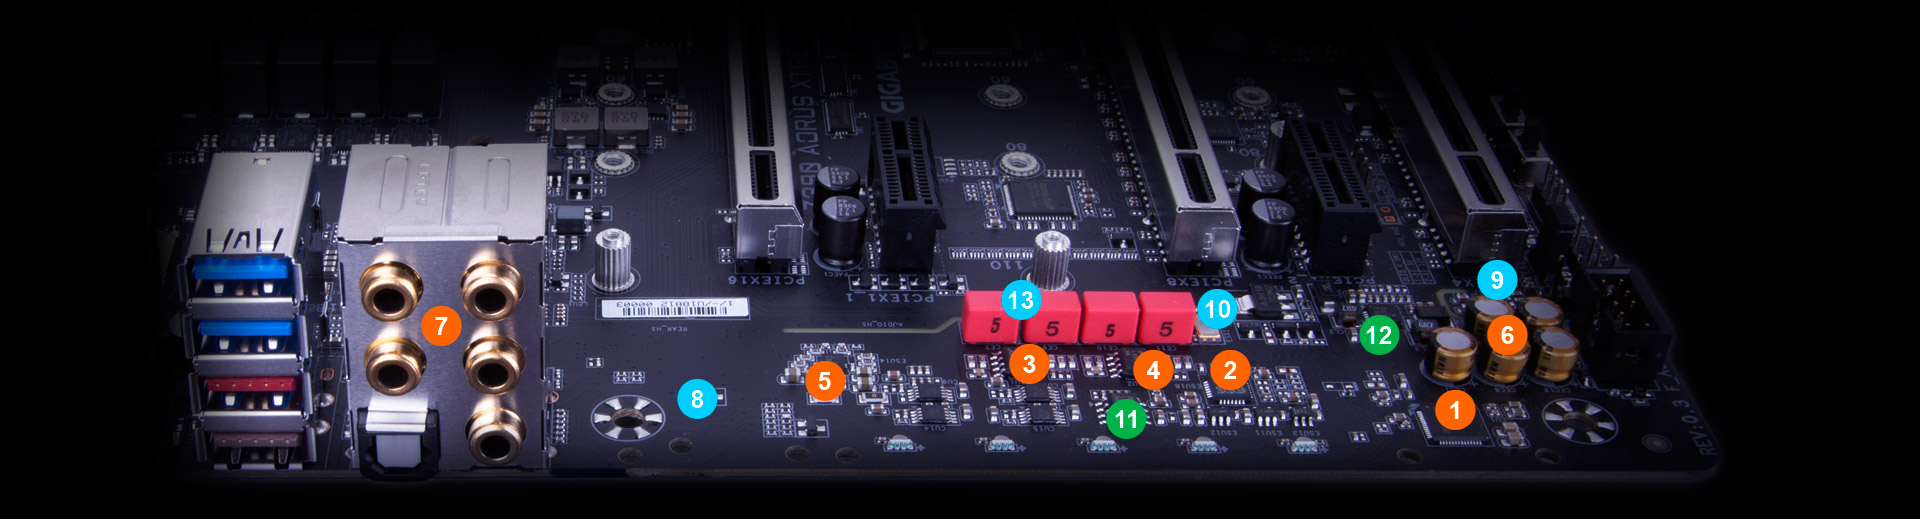 Closeup of the motherboard showing audio signal components